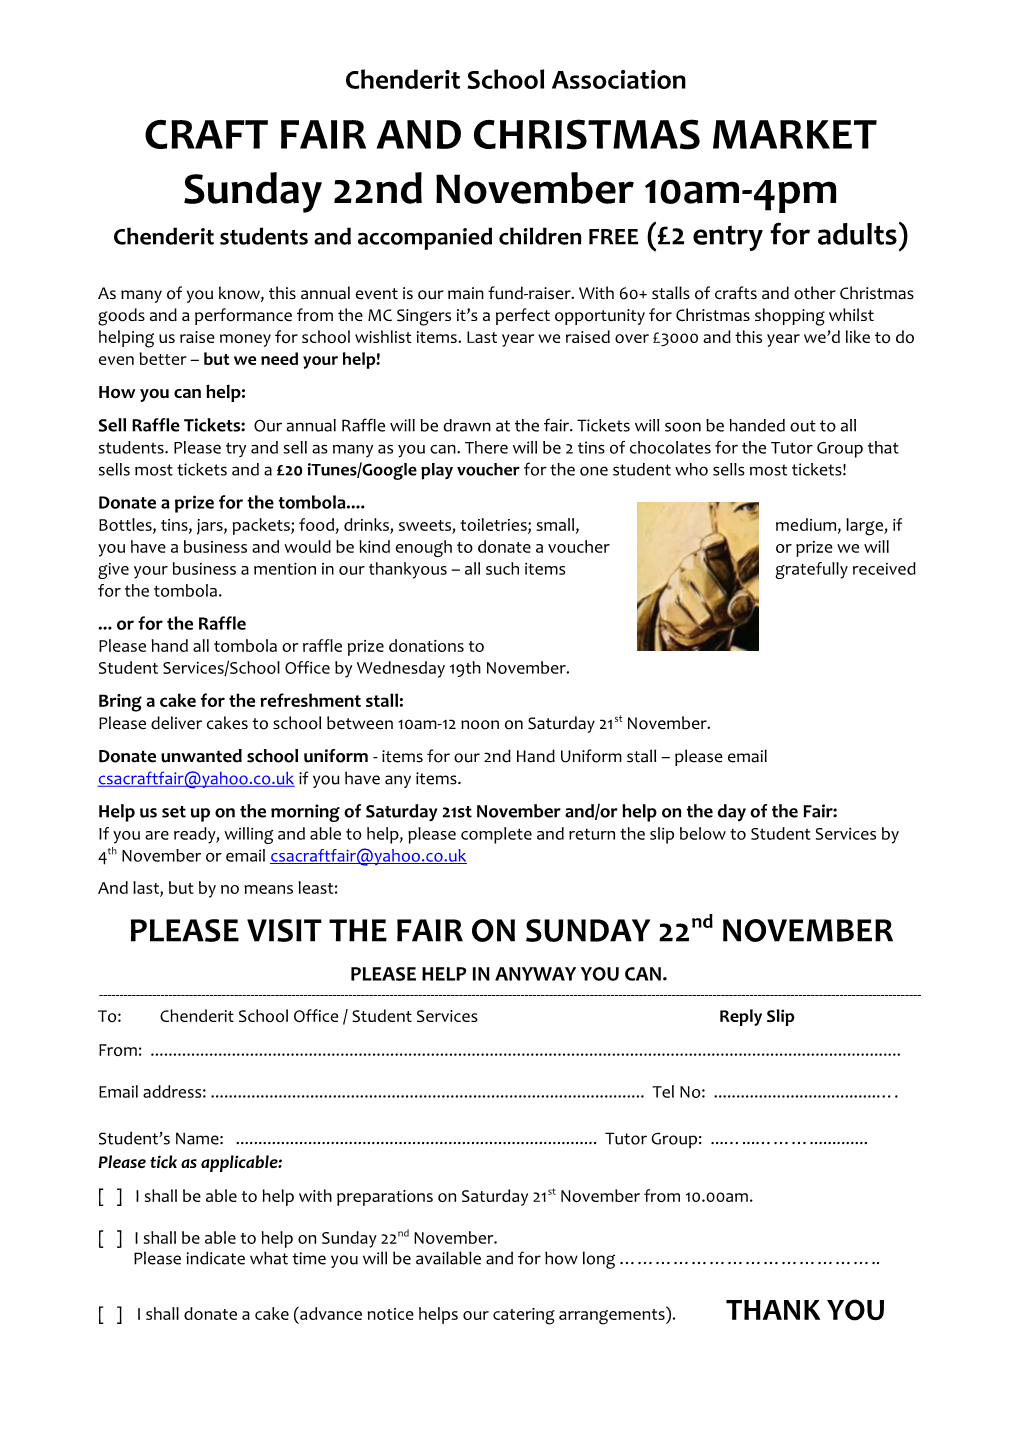 Chenderit Students and Accompanied Children FREE( 2 Entry for Adults)